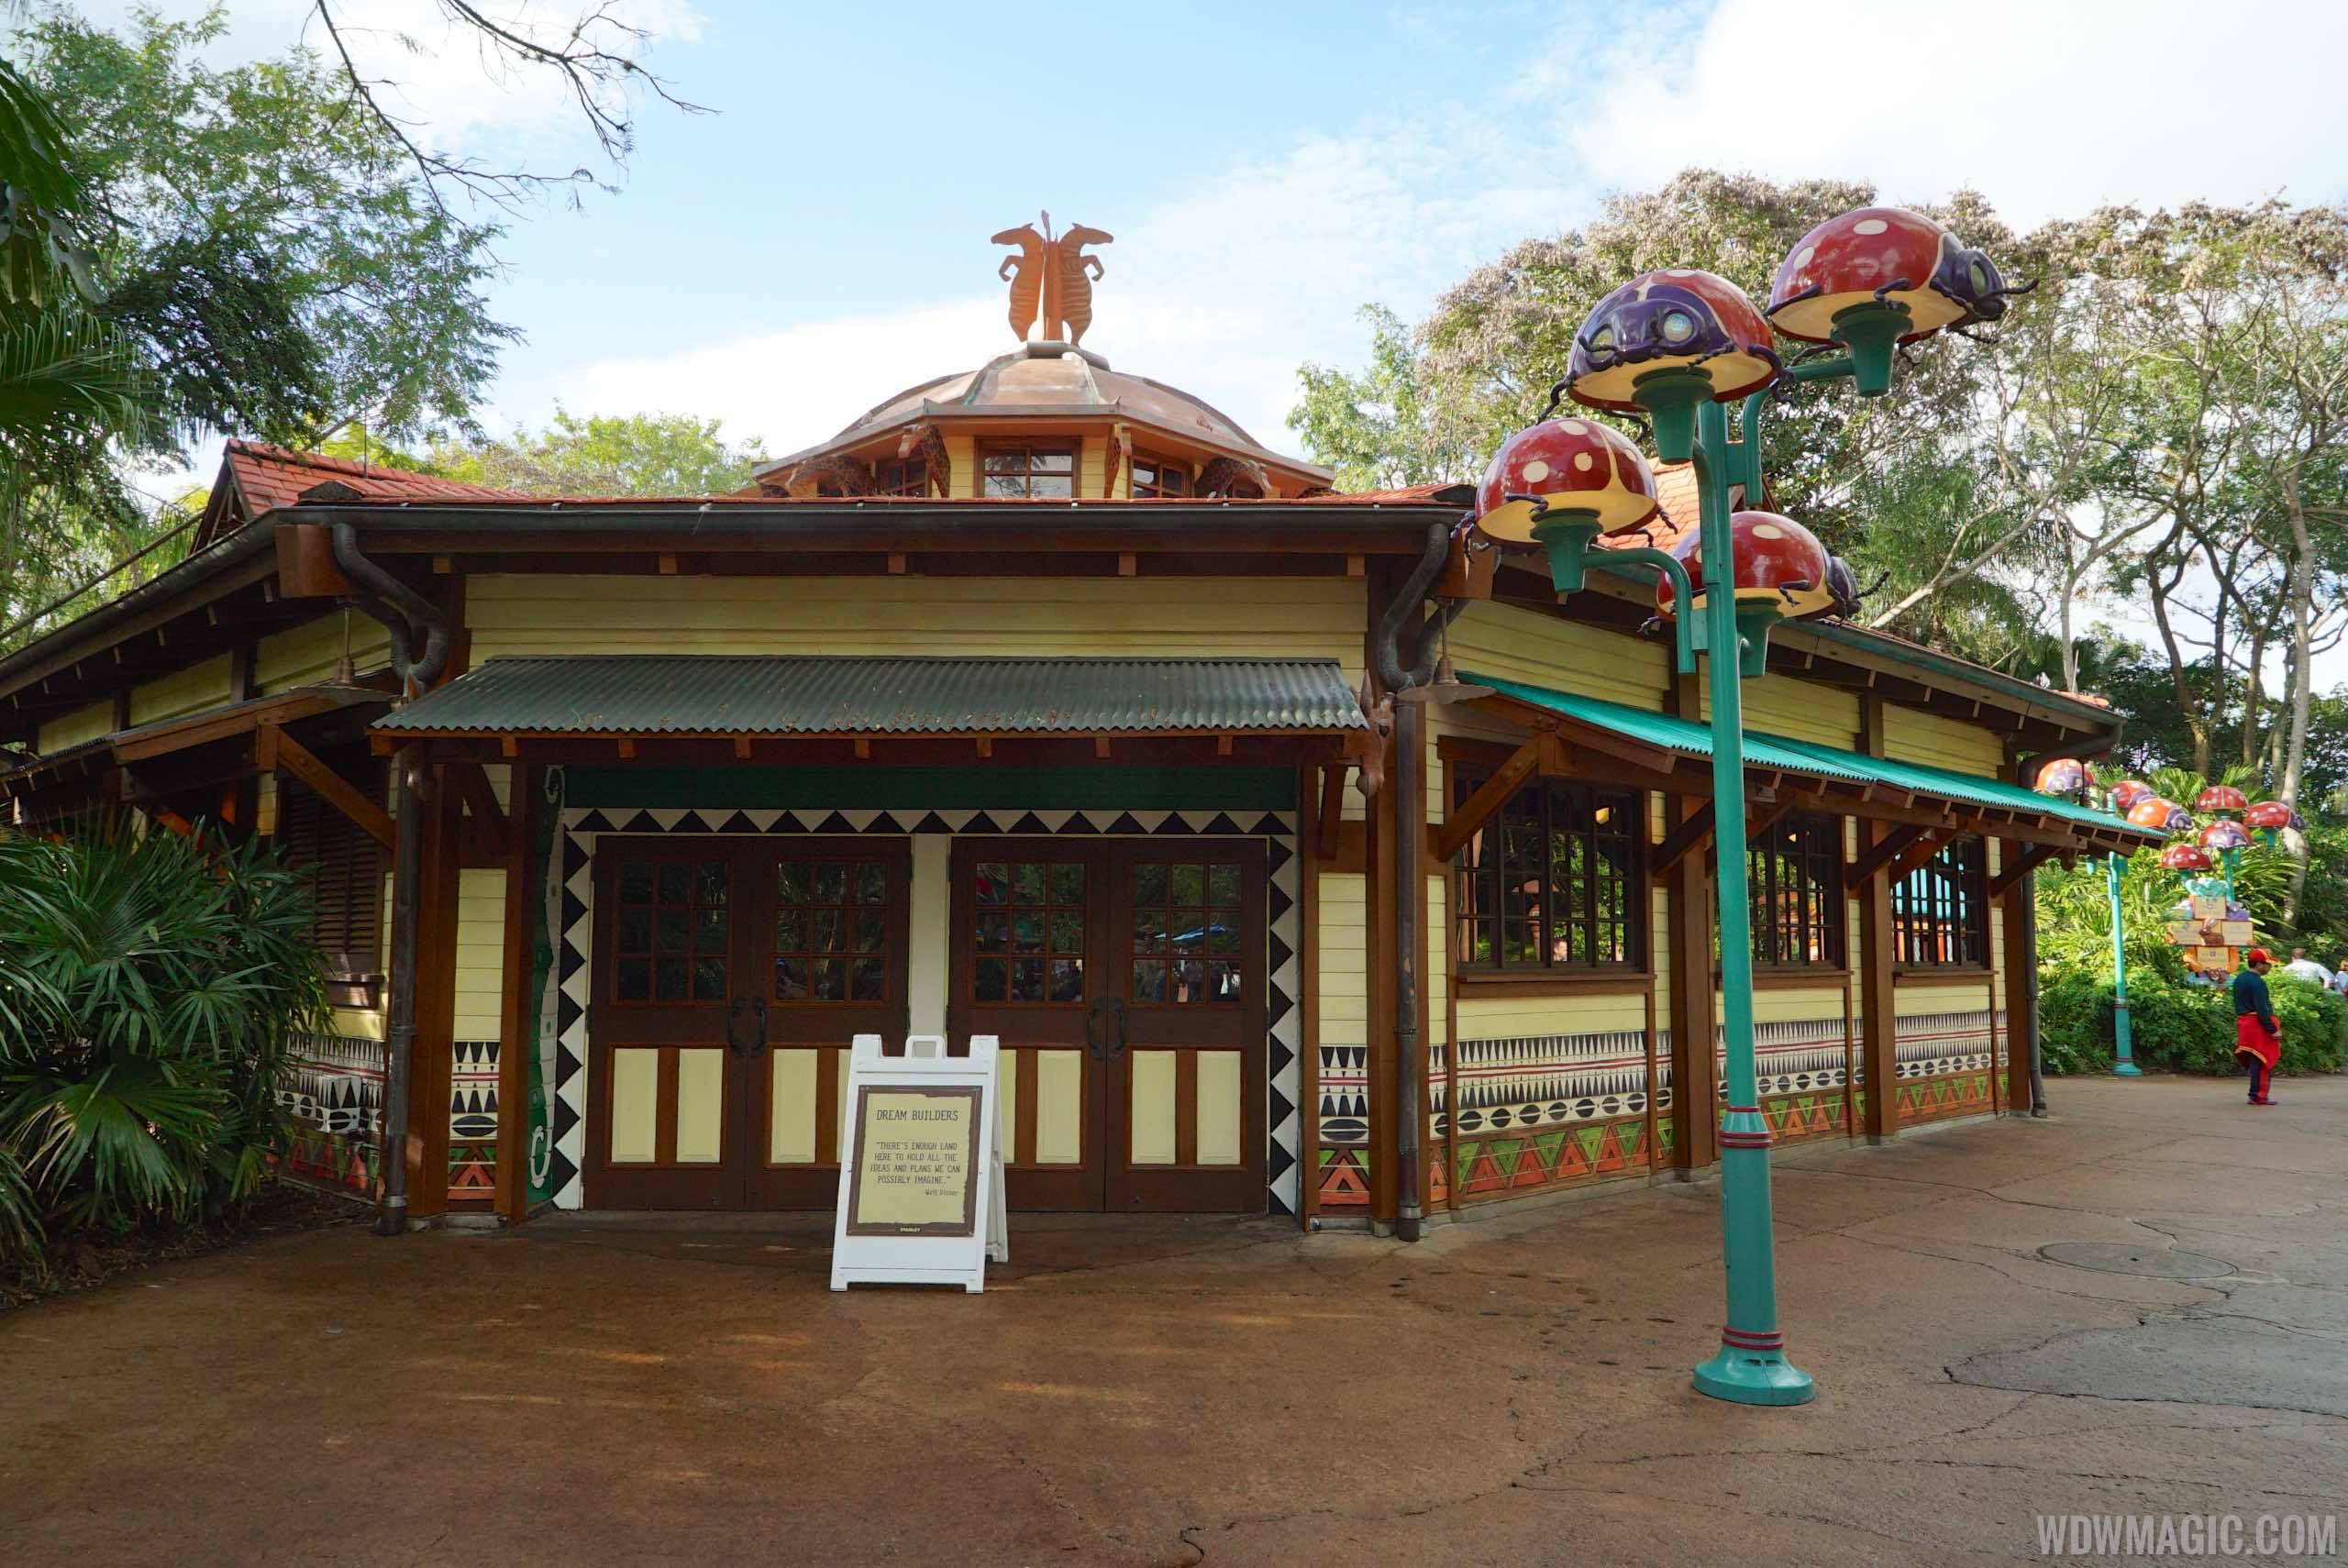 PHOTOS - Former Creature Comforts gets new color scheme ahead of the Starbucks conversion at Disney's Animal Kingdom